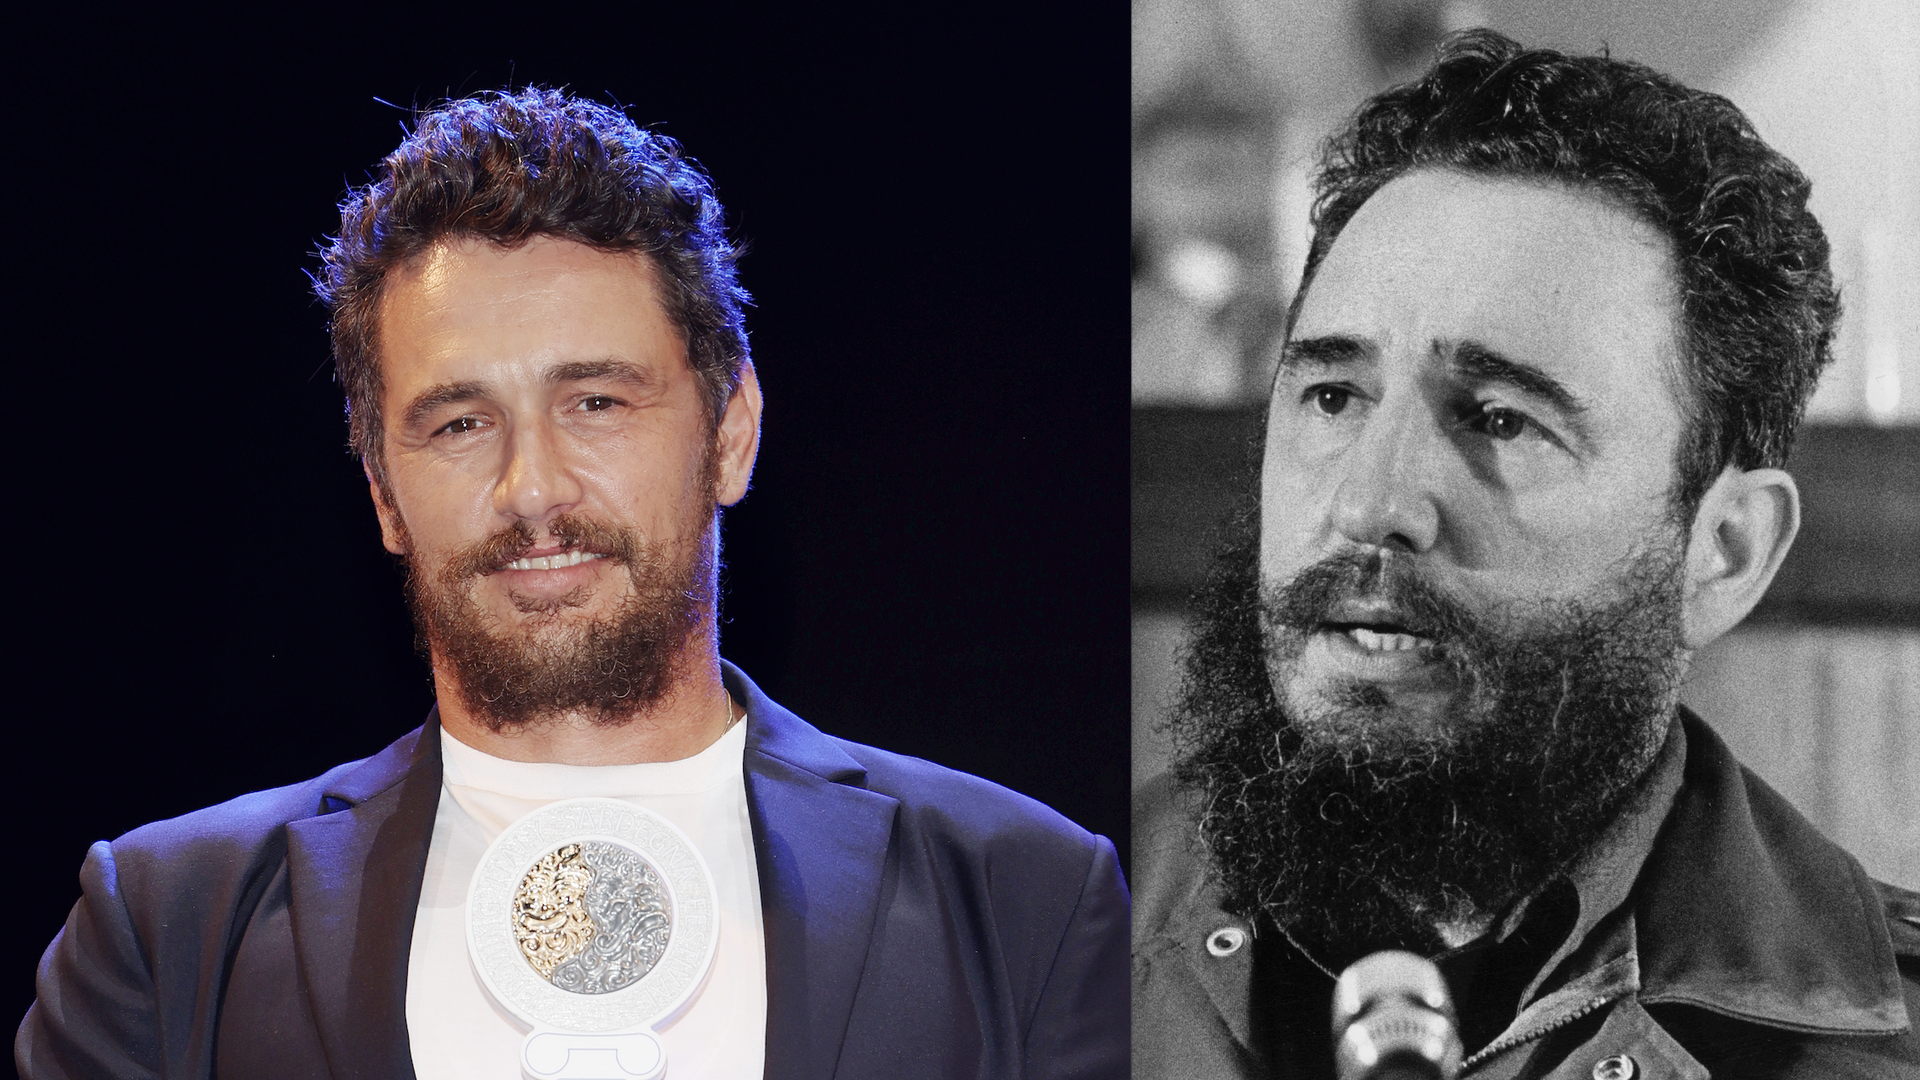 Images of James Franco and Fidel Castro next to each other.